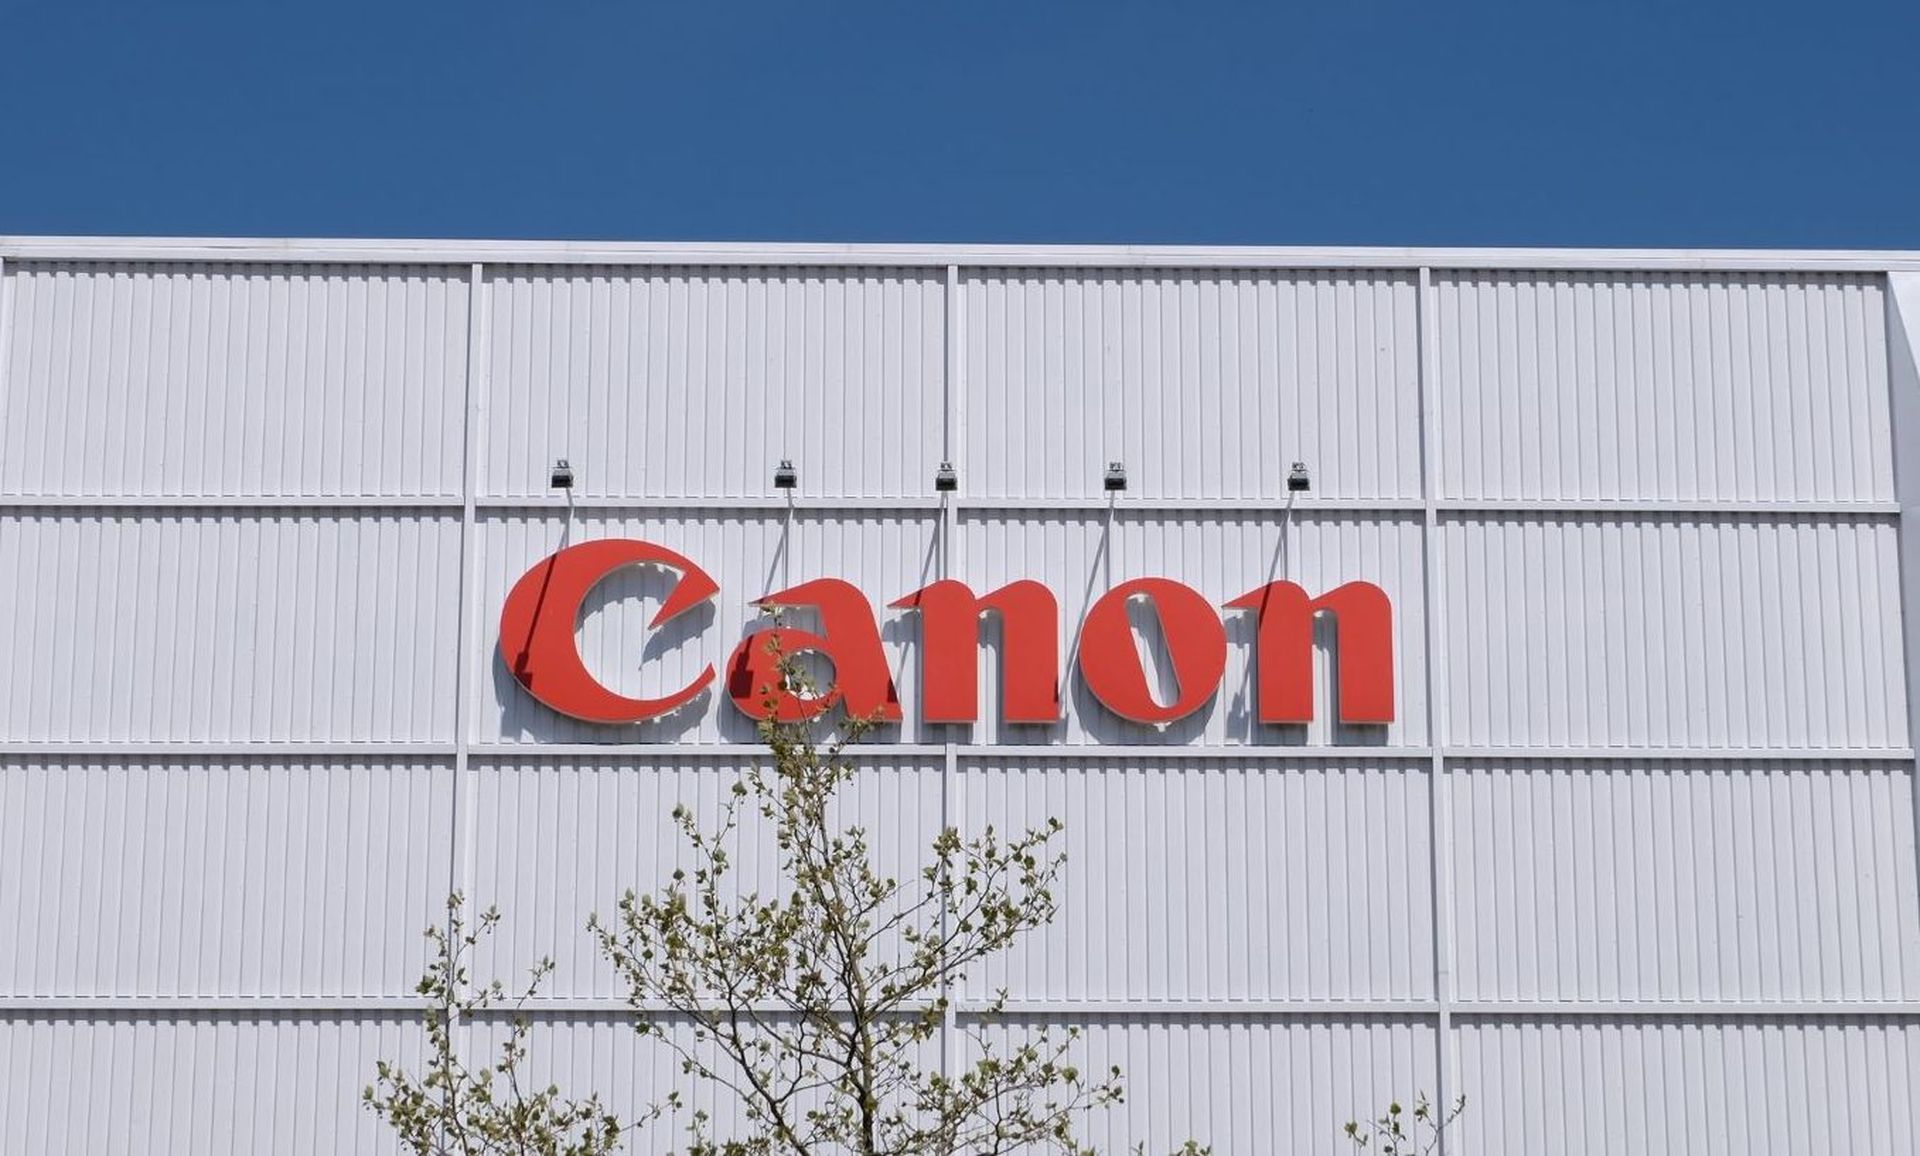 Canon is among the companies targeted by a sophisticated ransomware attack this year. Ransomware groups are increasingly adopting the practices and tactics of the corporate businesses they target. (DennisM2)